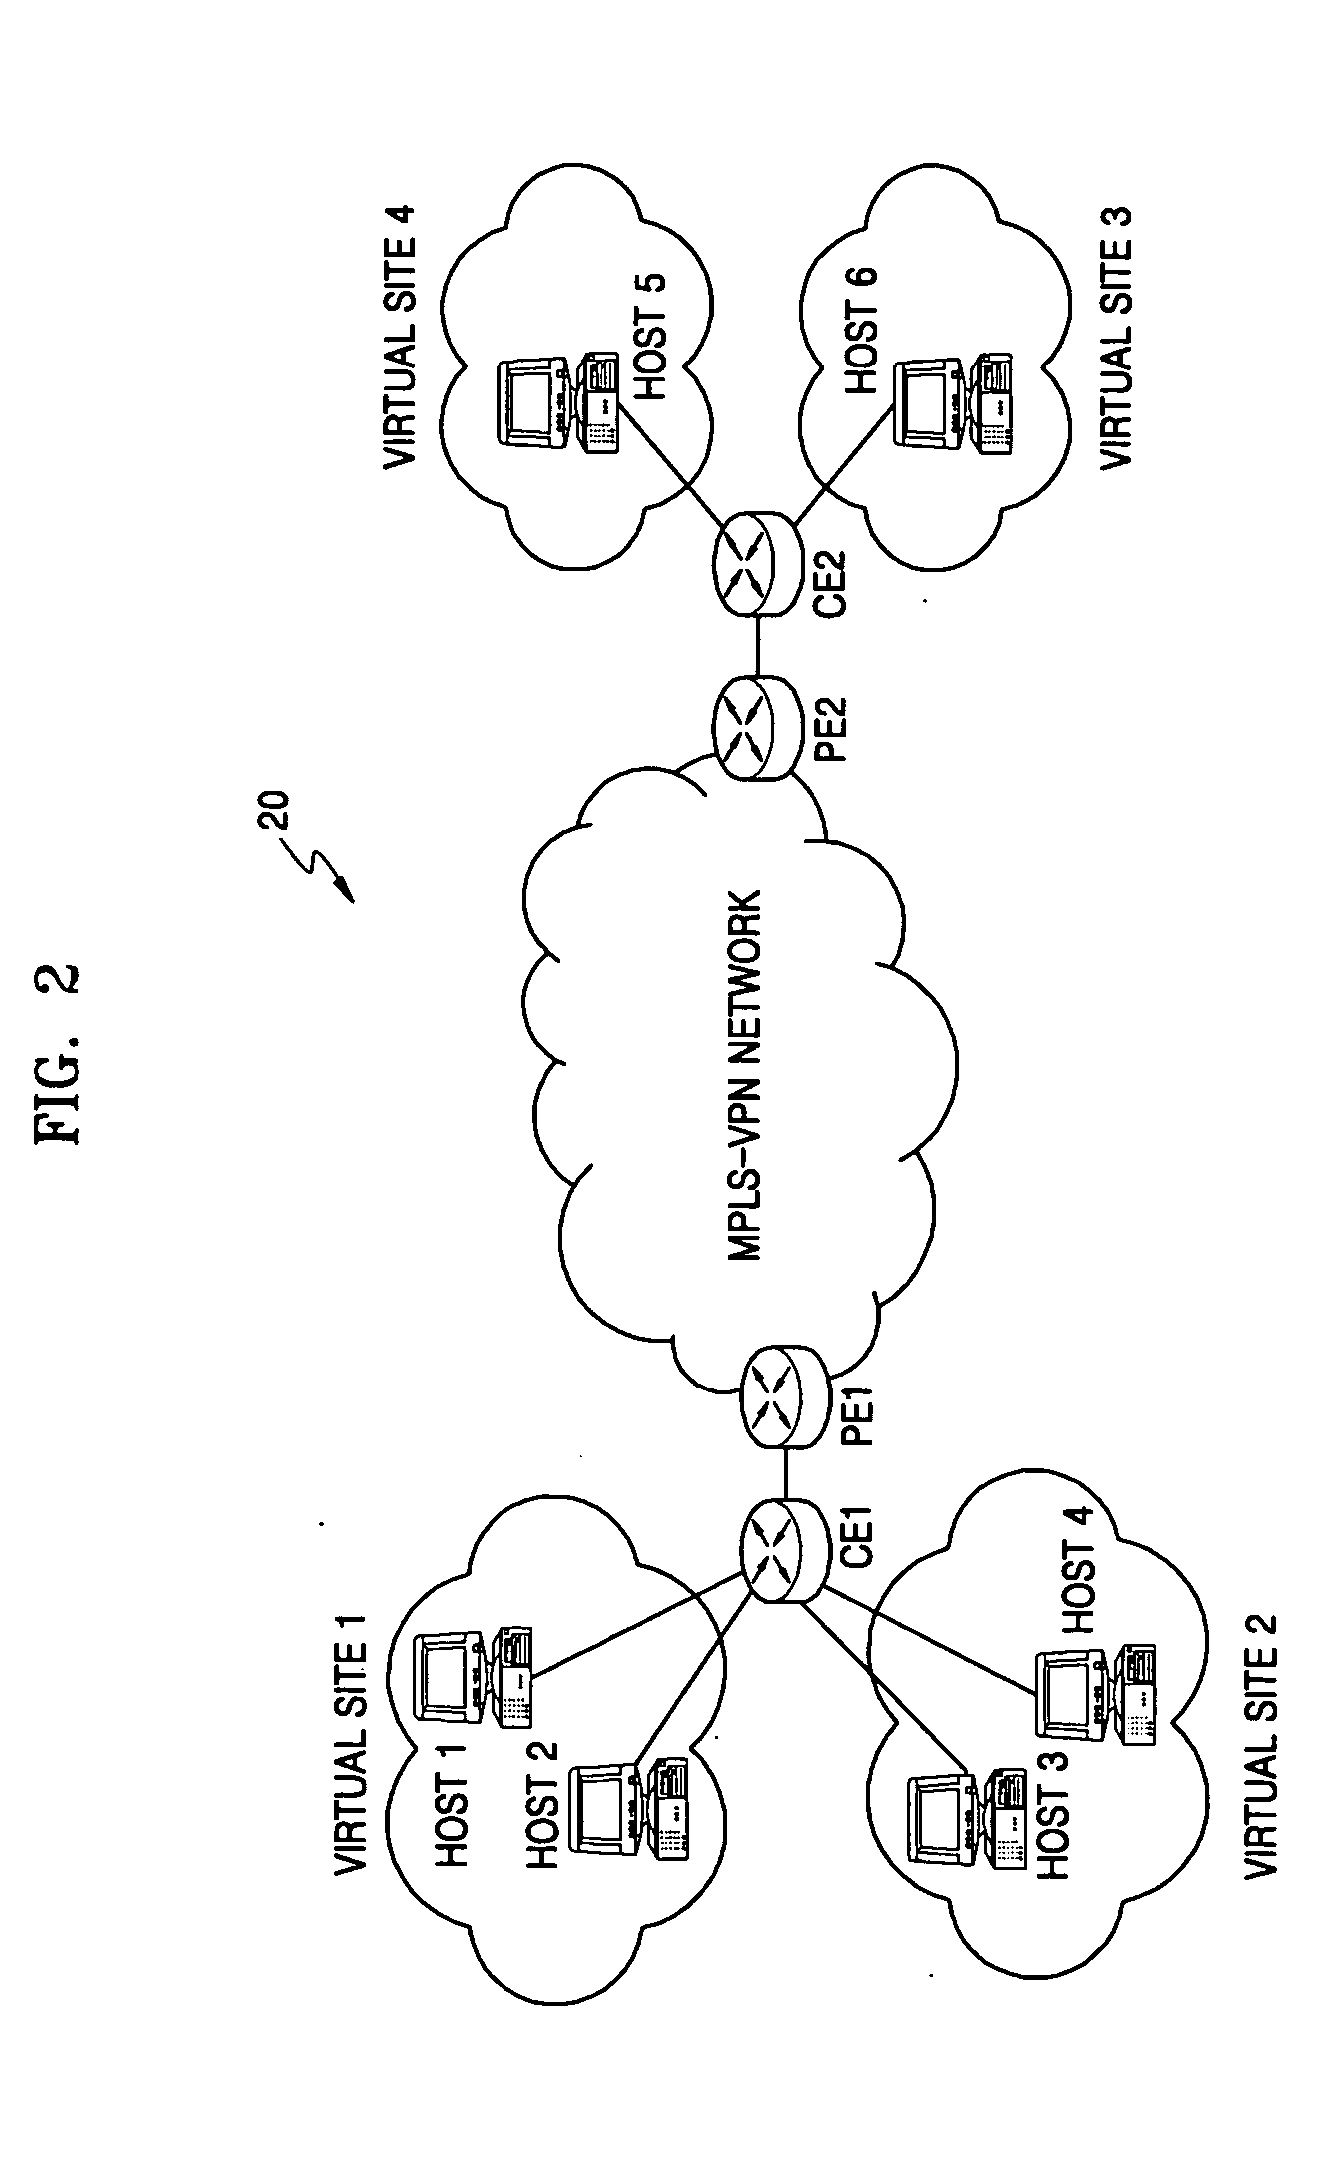 Apparatus and method of designating virtual sites using policy informations in multiprotocol label switching networks